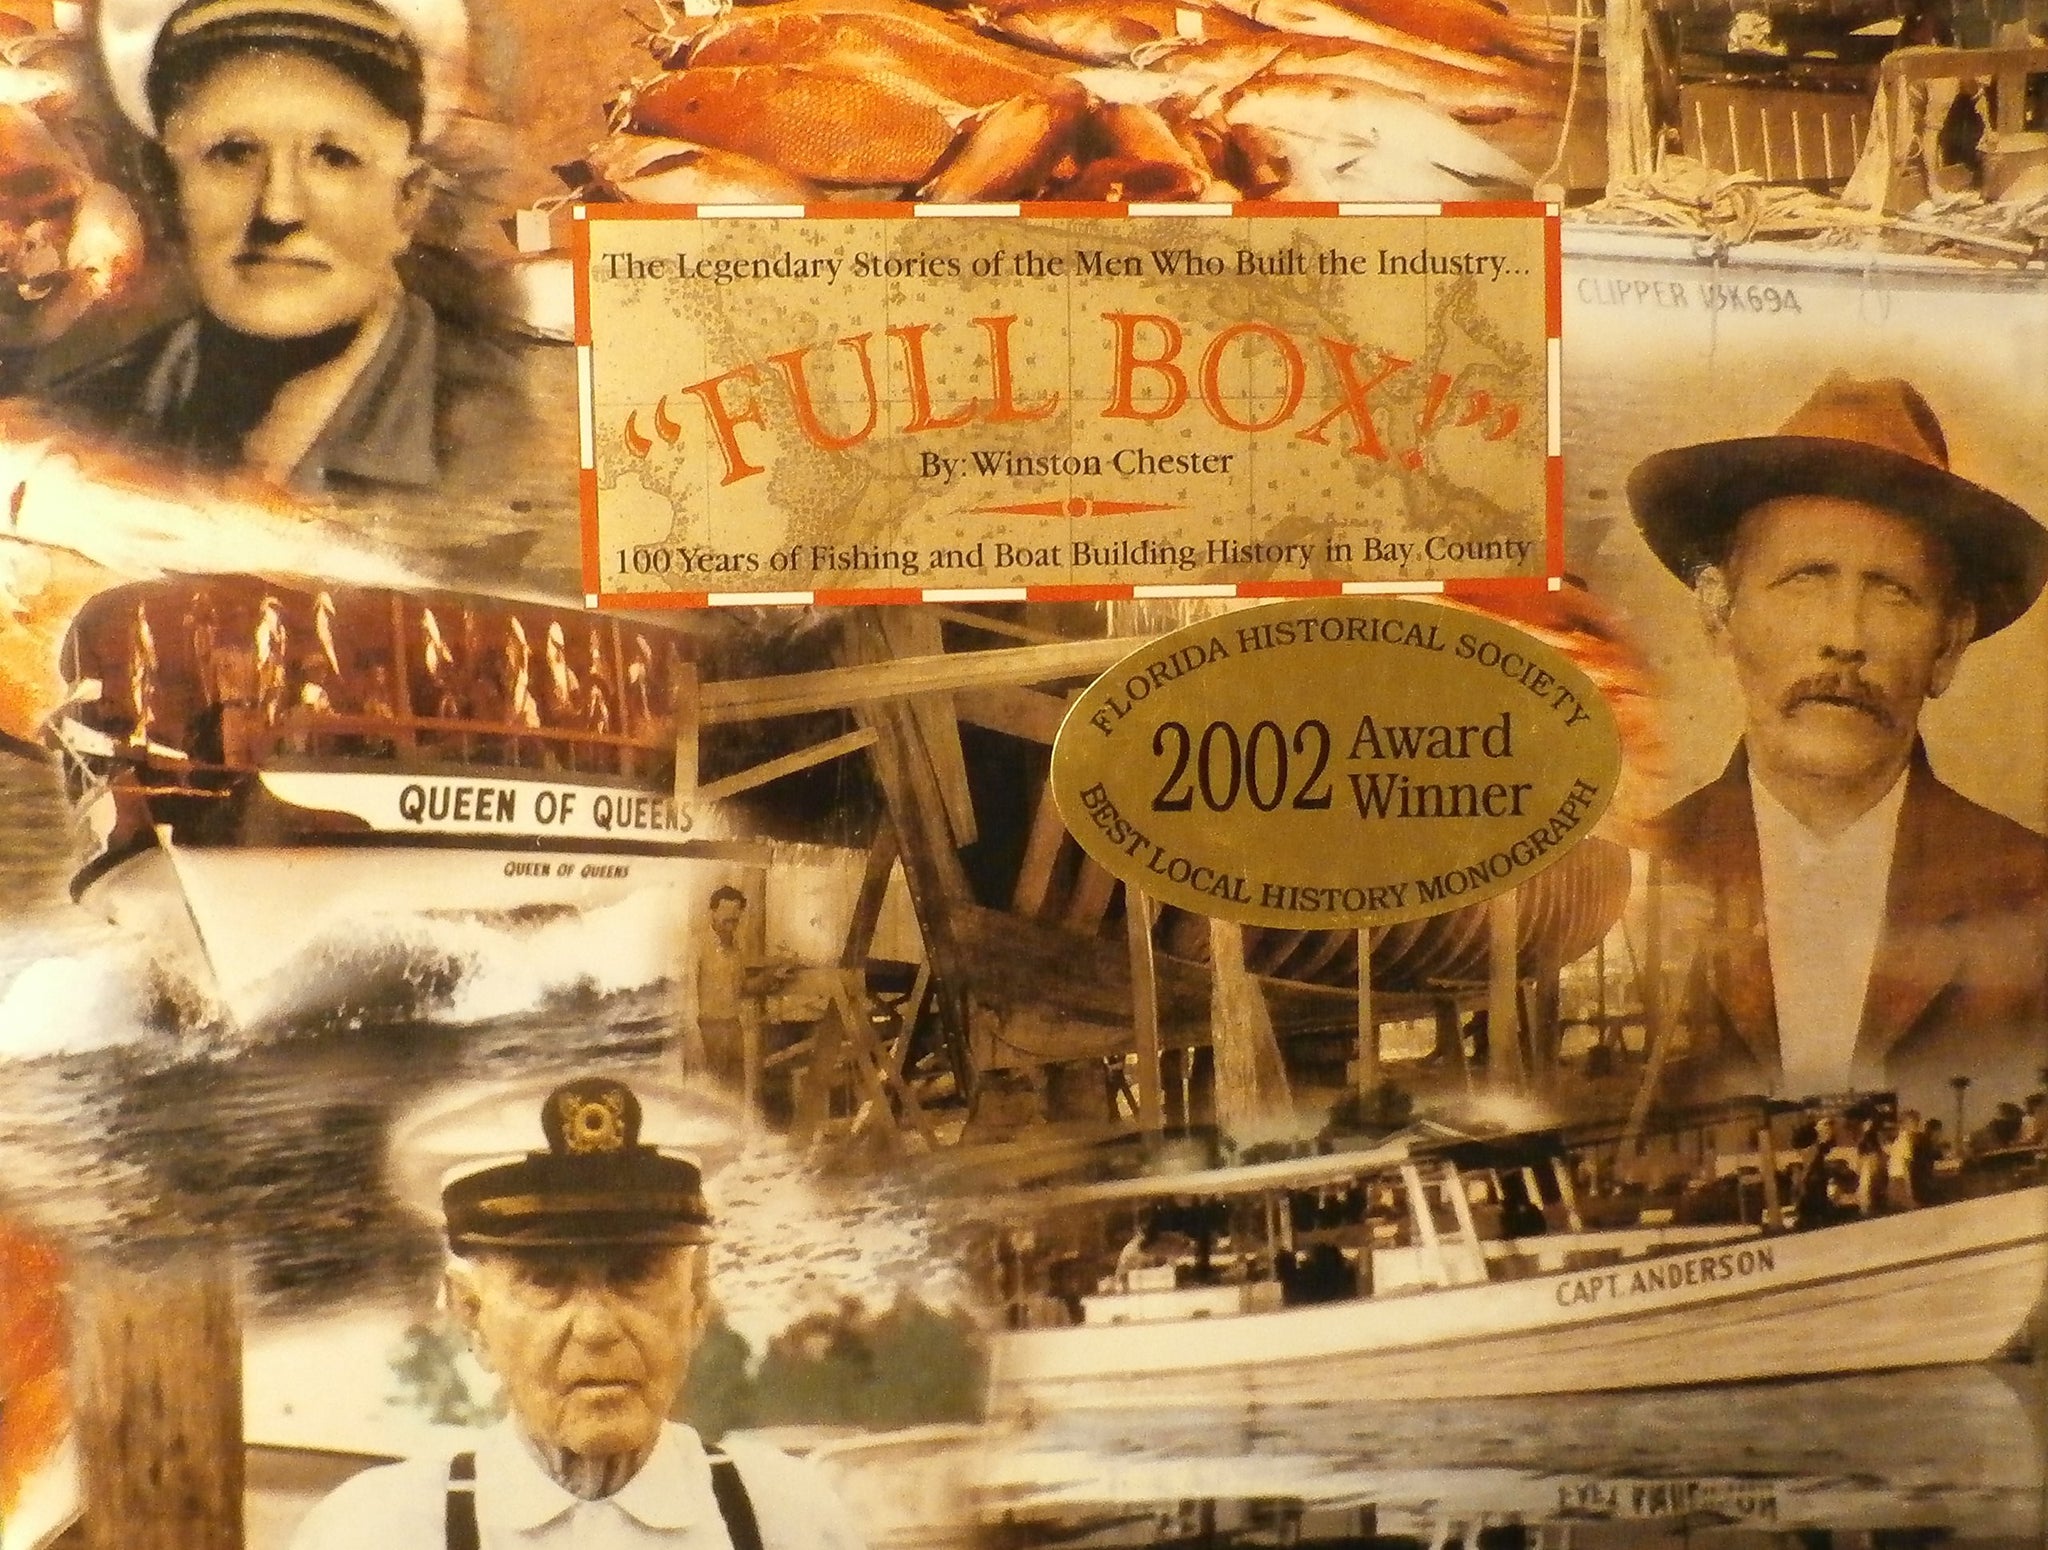 "Full box!": 100 years of fishing and boat building history in Bay County